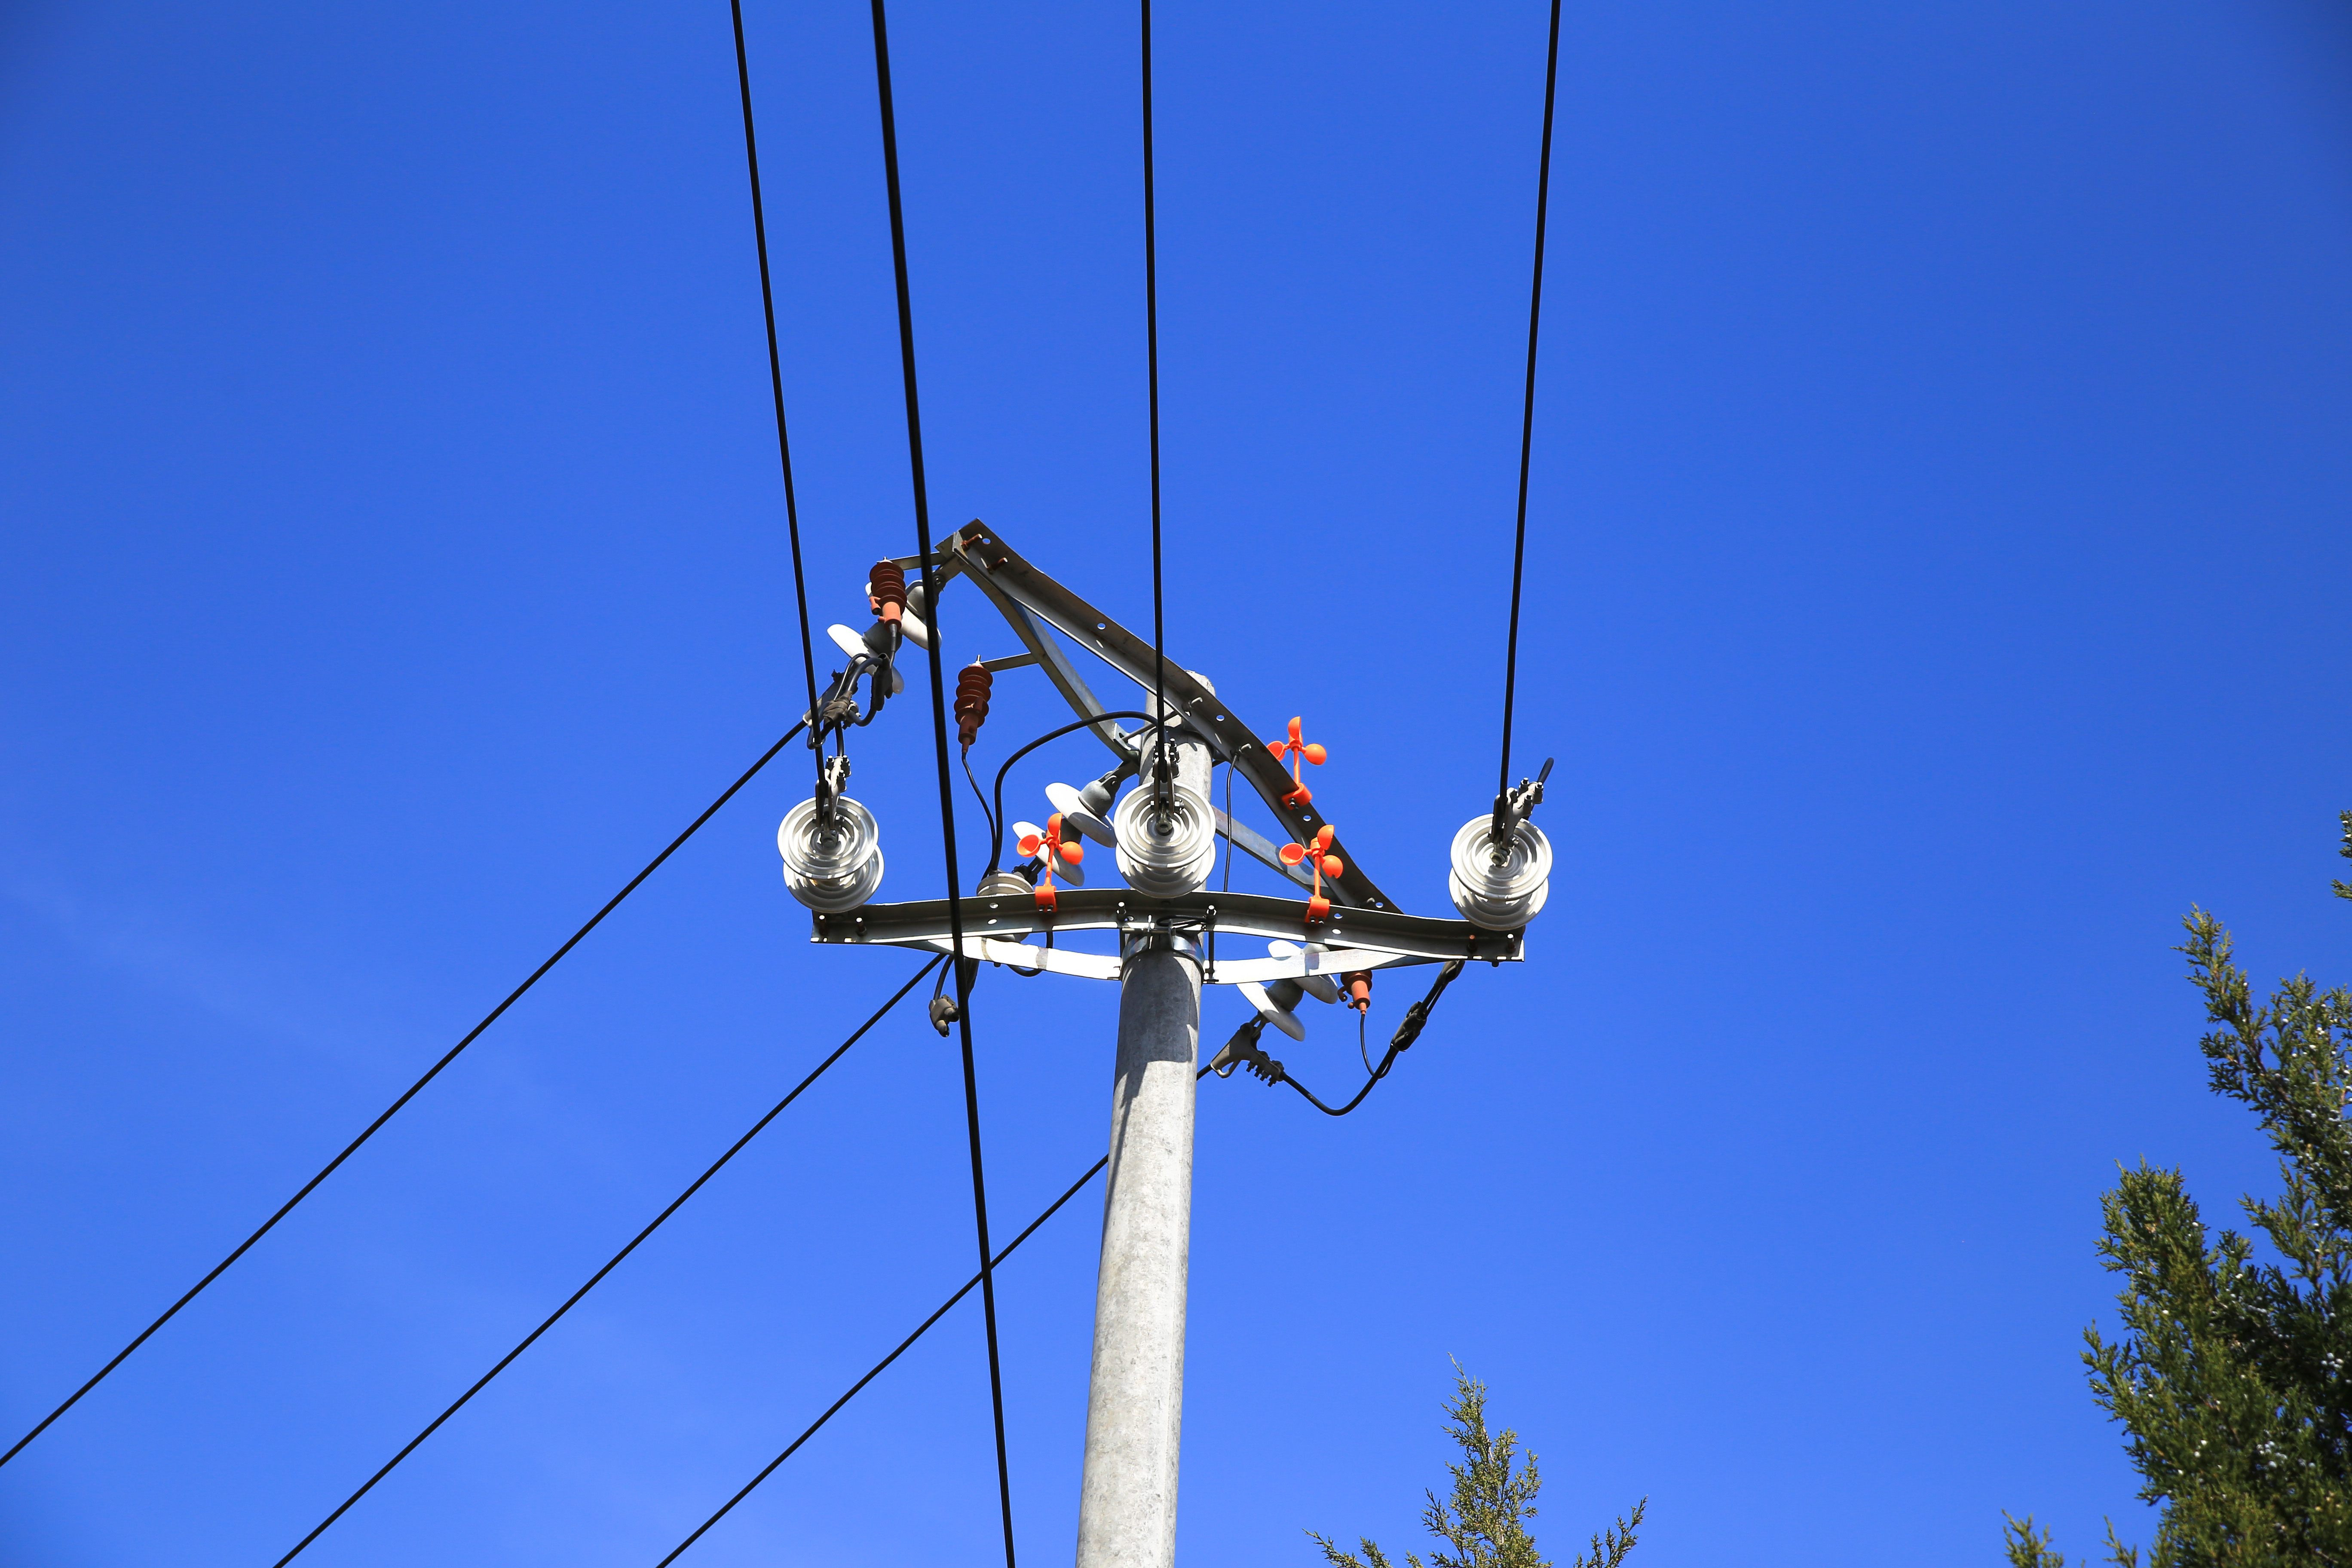 Working near power lines: What you need to know